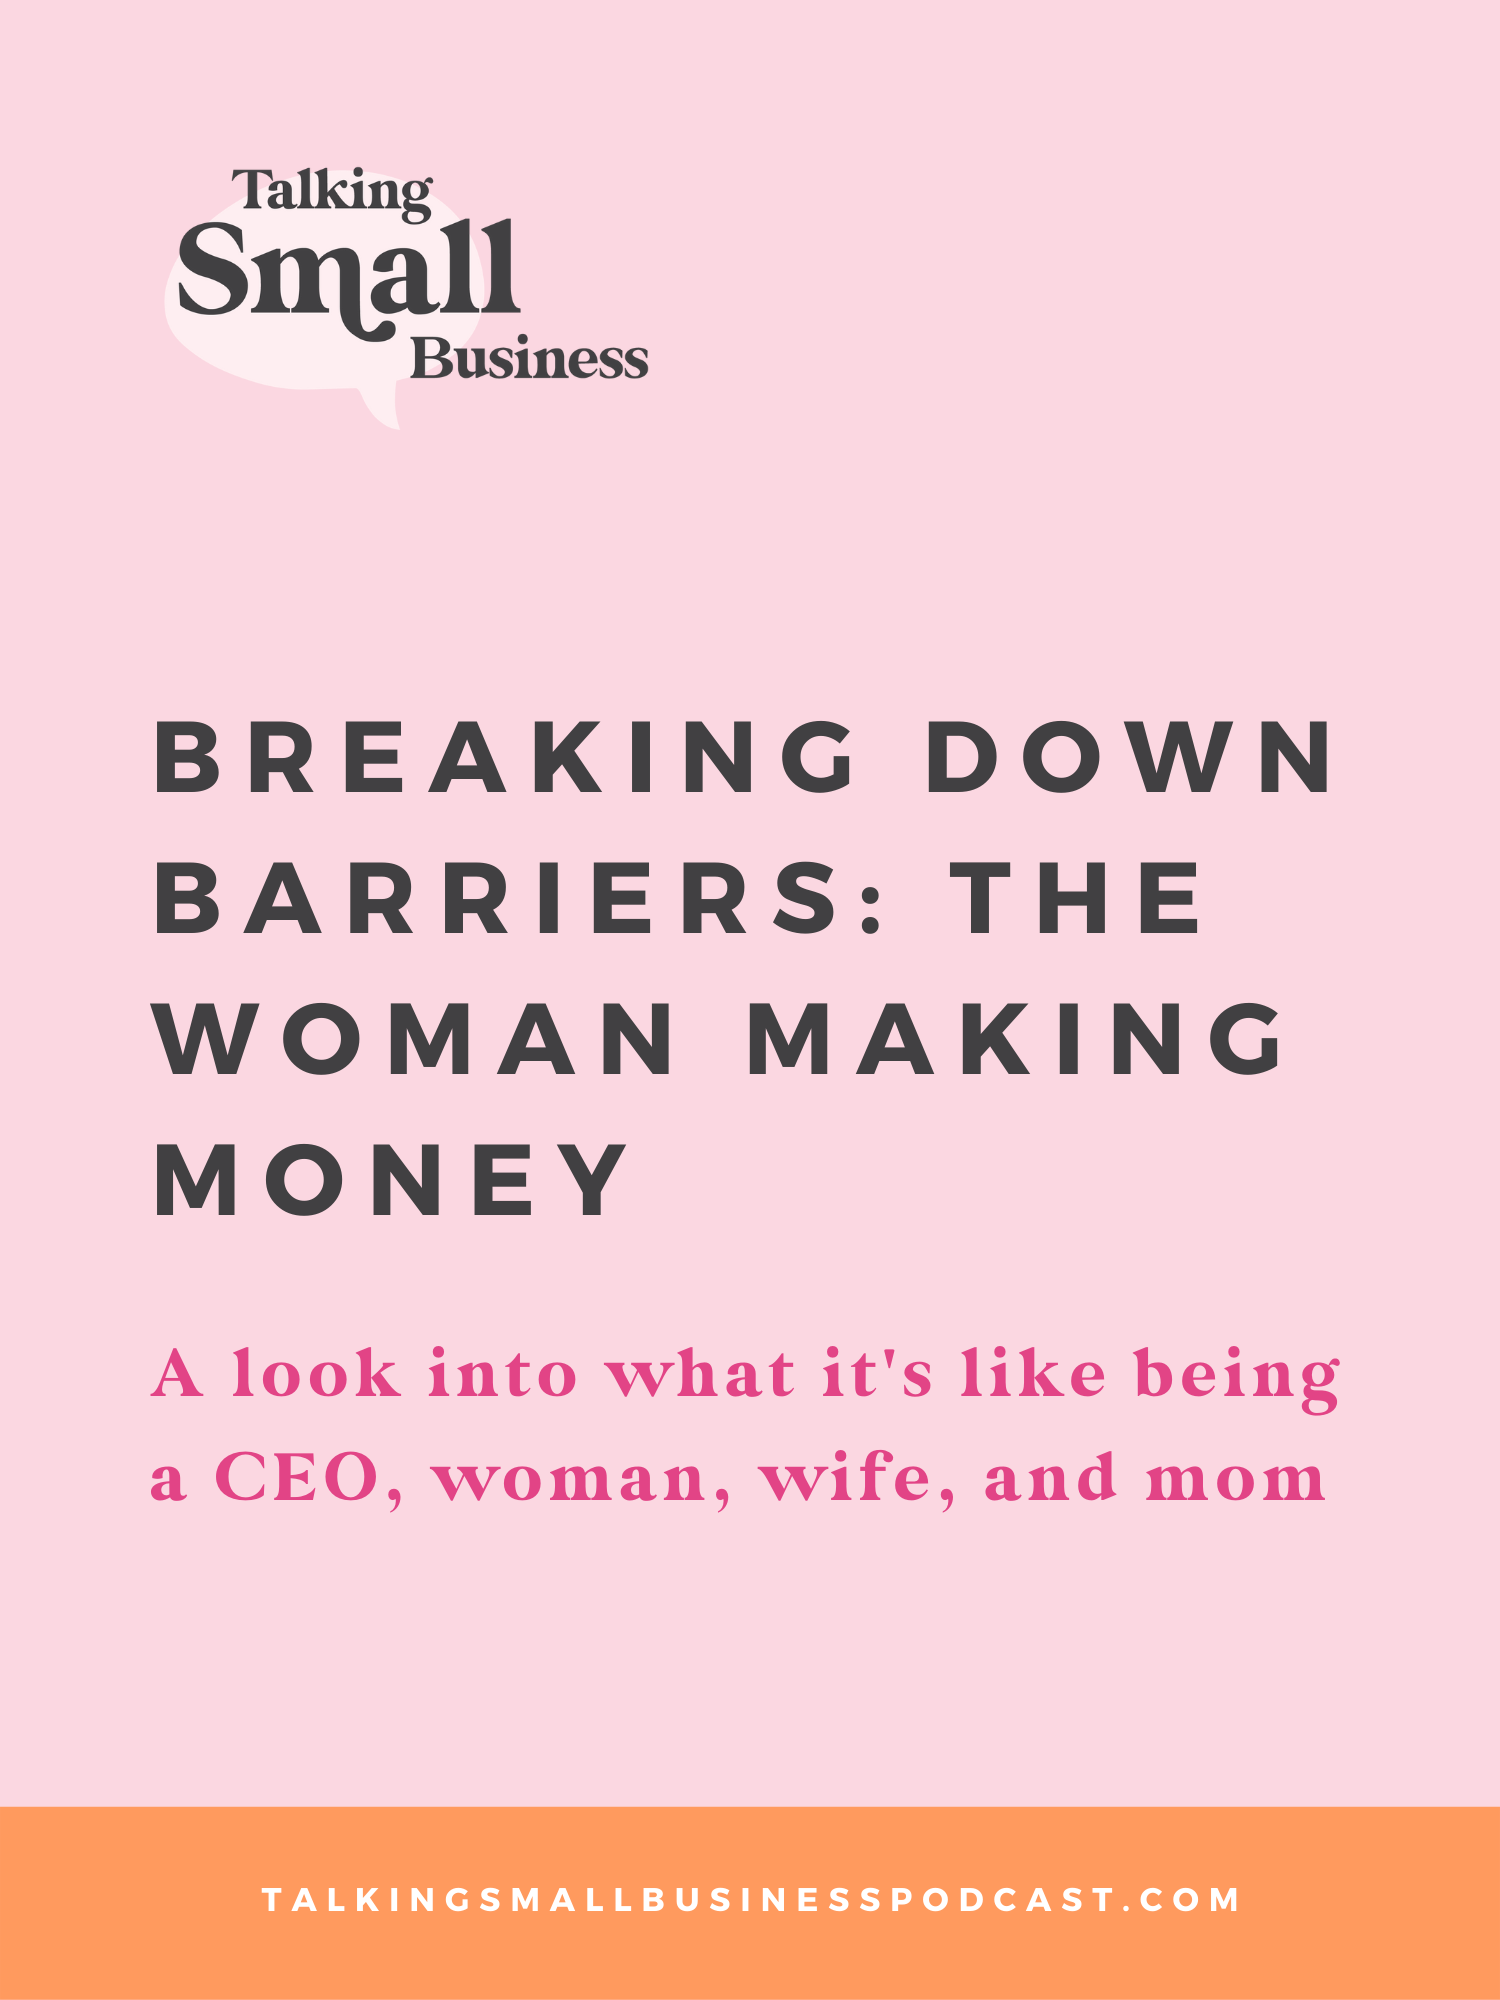 The Woman Making Money: Breaking Down Barriers in a real conversation about being the financial backbone and CEO of your business